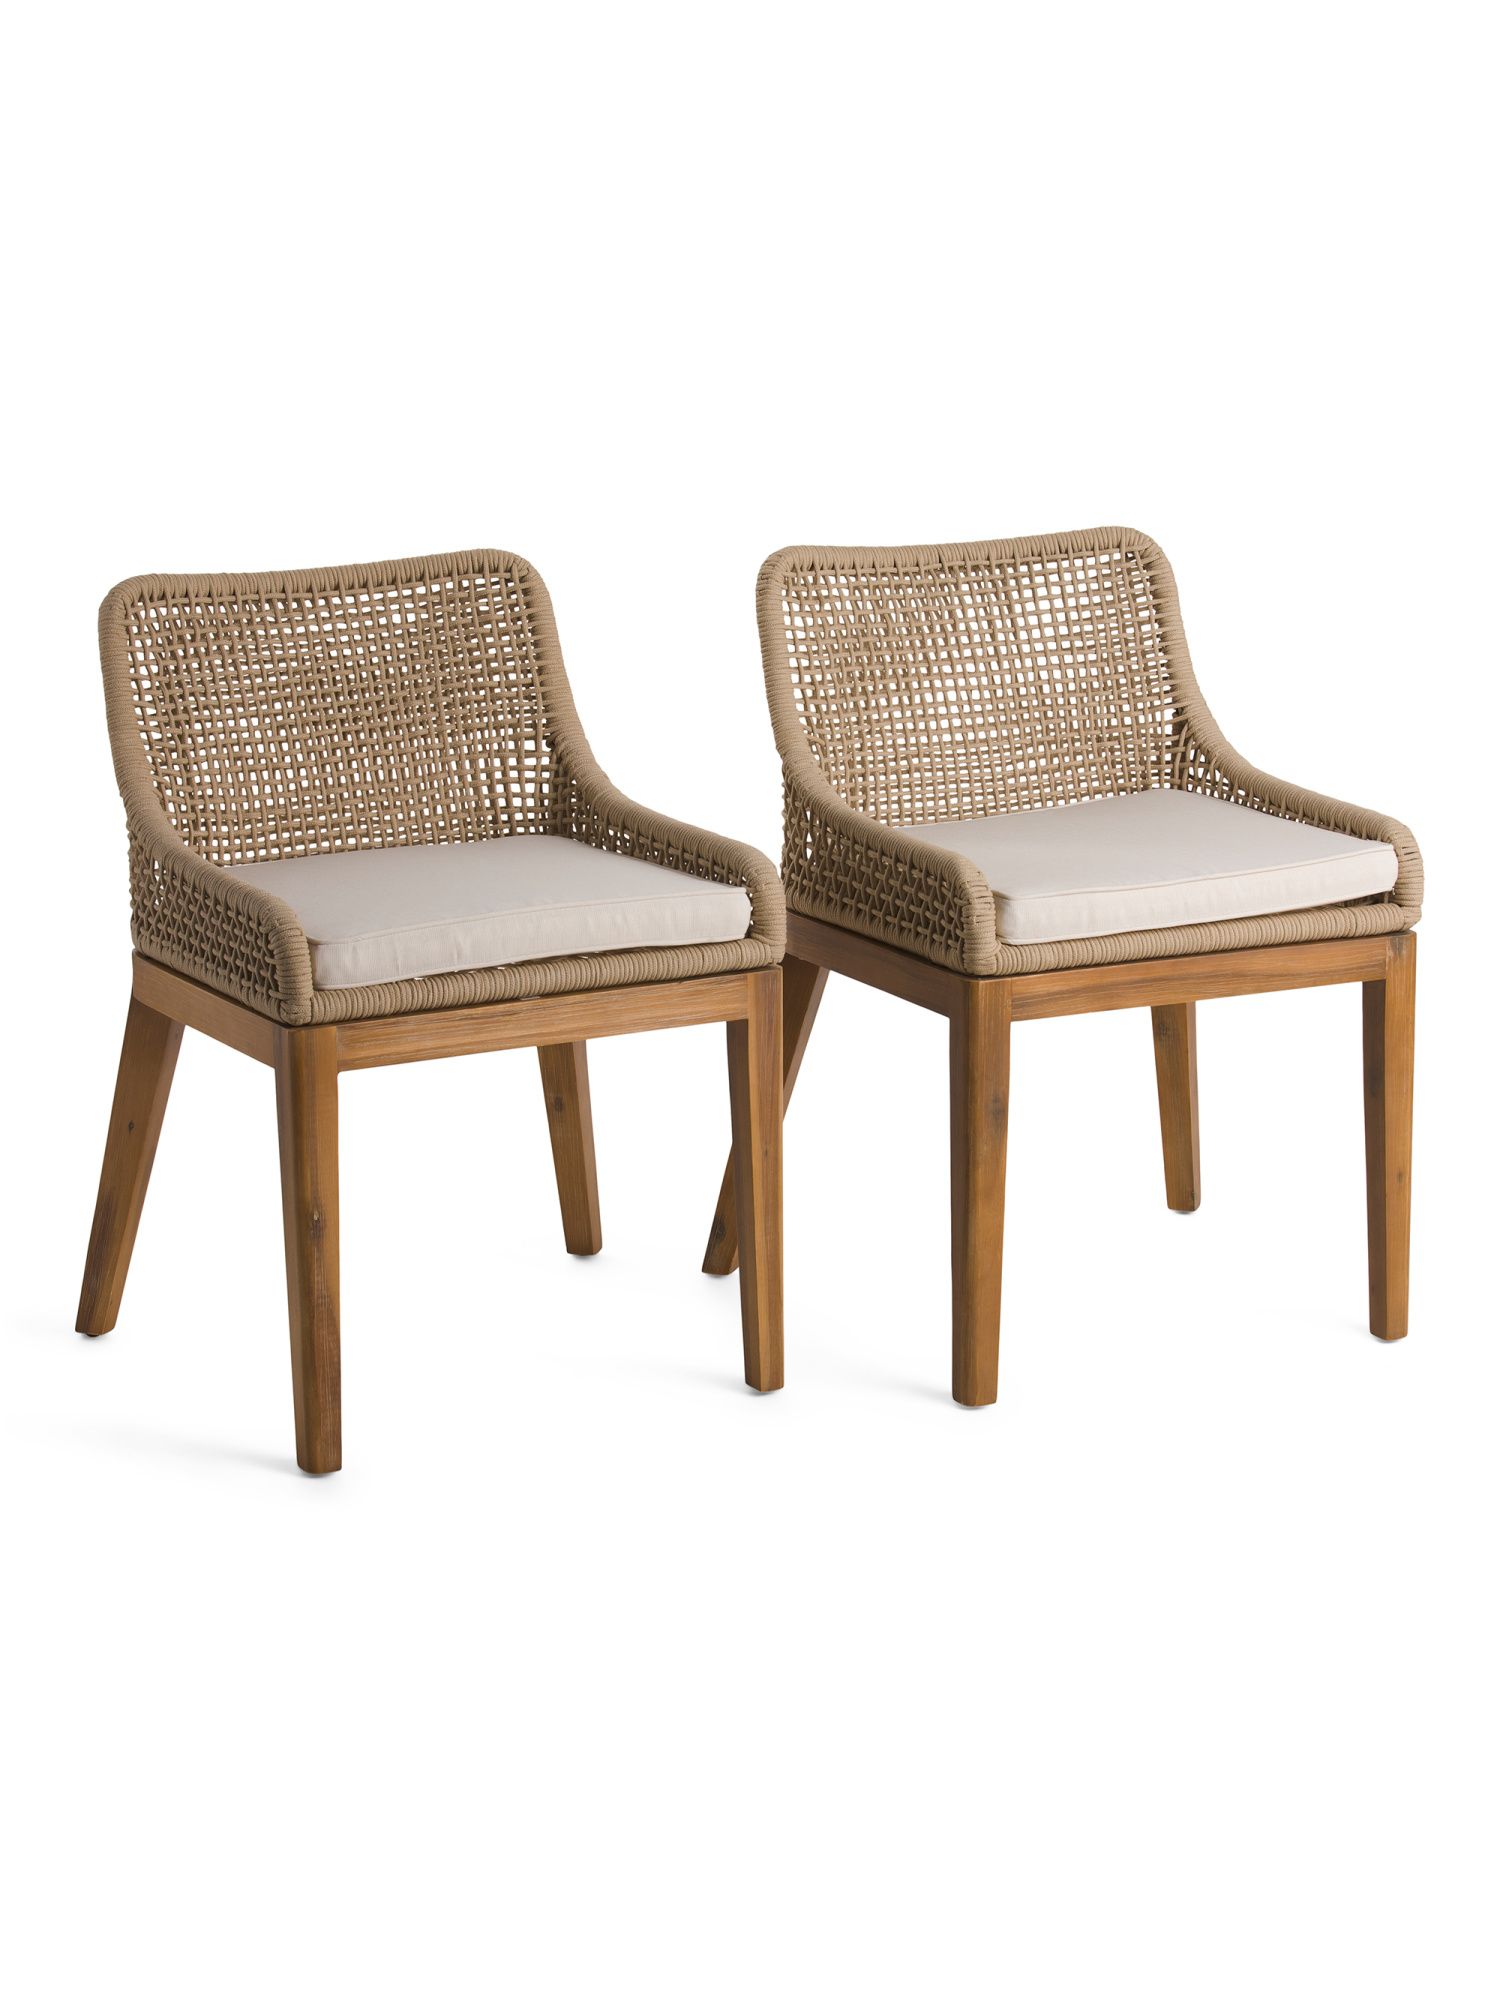 Set Of 2 Woven Rope Dining Chairs | Kitchen & Dining Room | T.J.Maxx | TJ Maxx